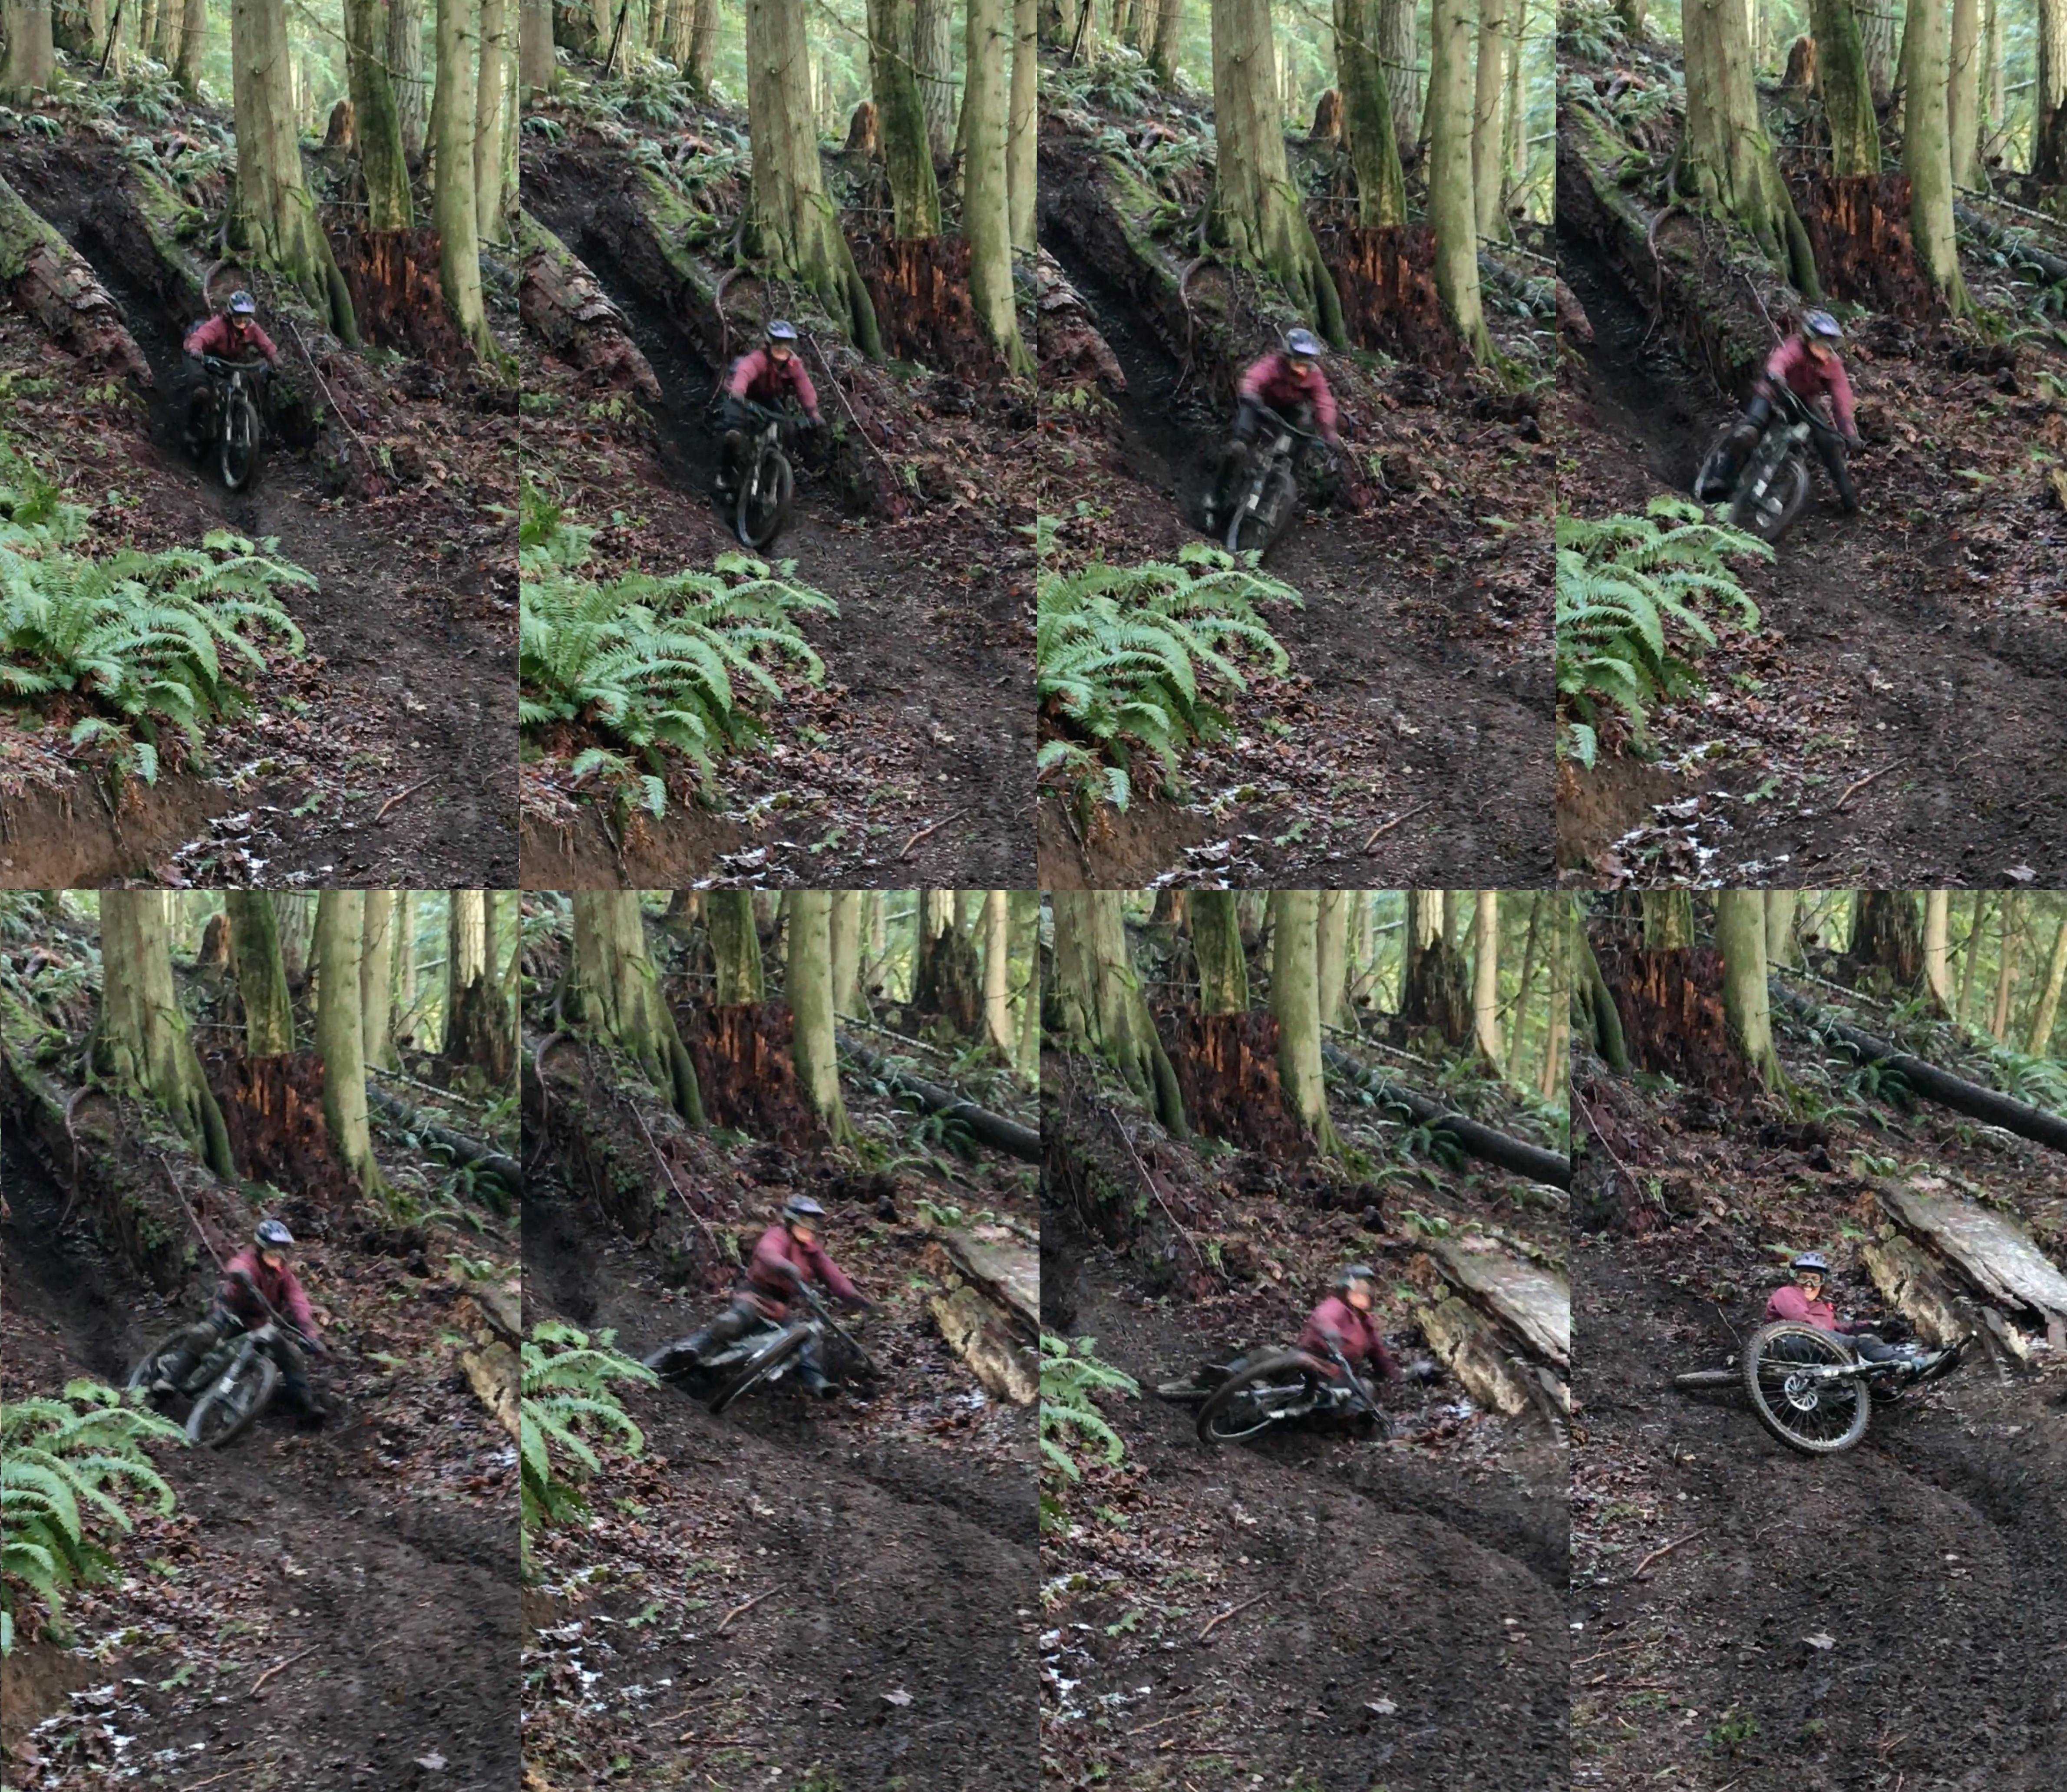 Emma properly evaluating the situation and laying the bike down. Eight images of different stages of a woman falling off her bike.